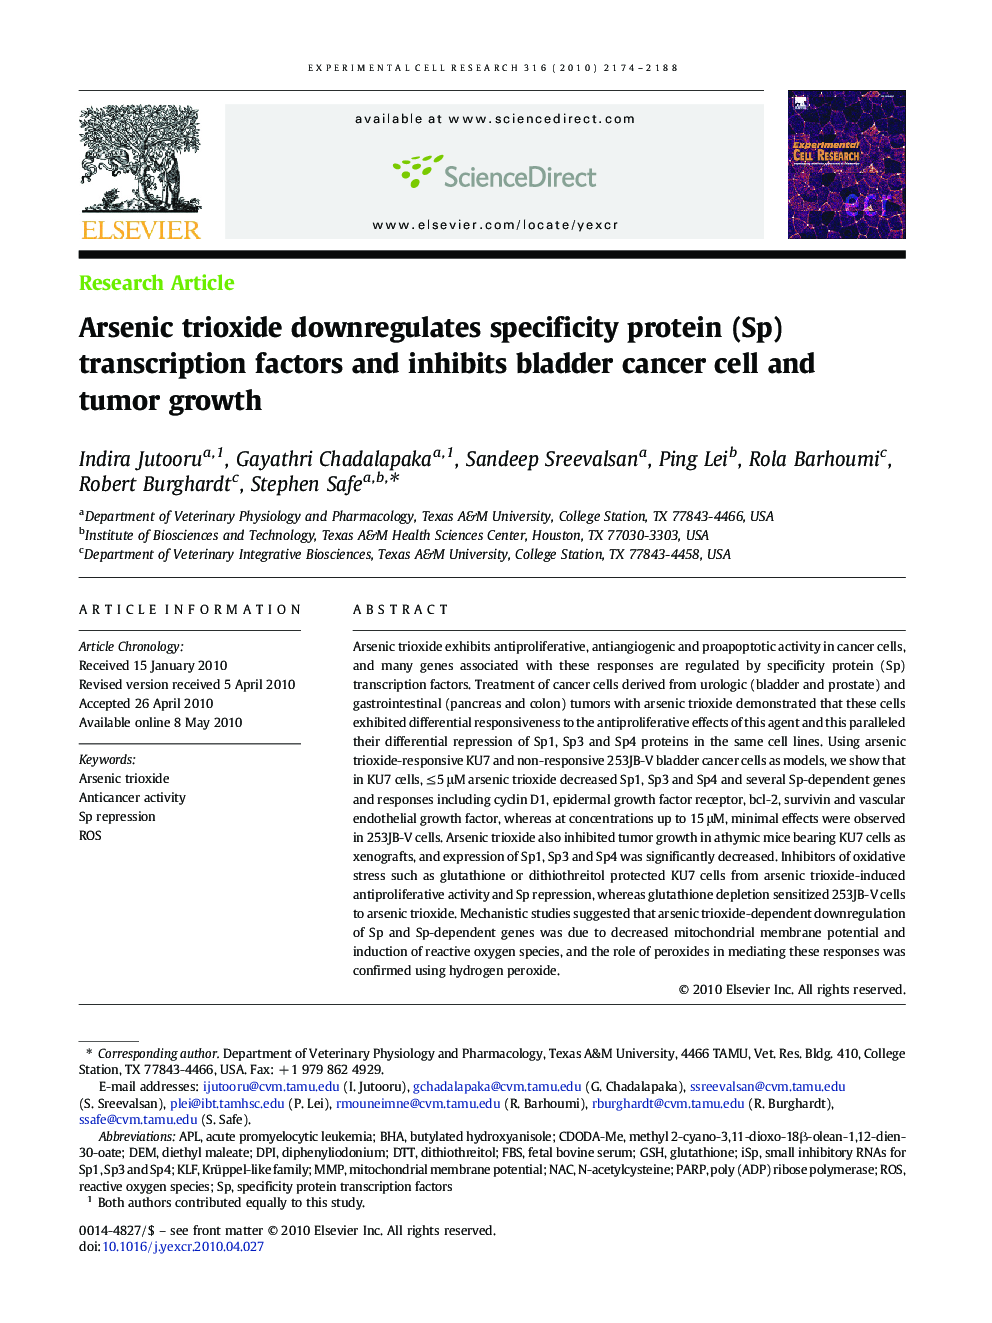 Arsenic trioxide downregulates specificity protein (Sp) transcription factors and inhibits bladder cancer cell and tumor growth